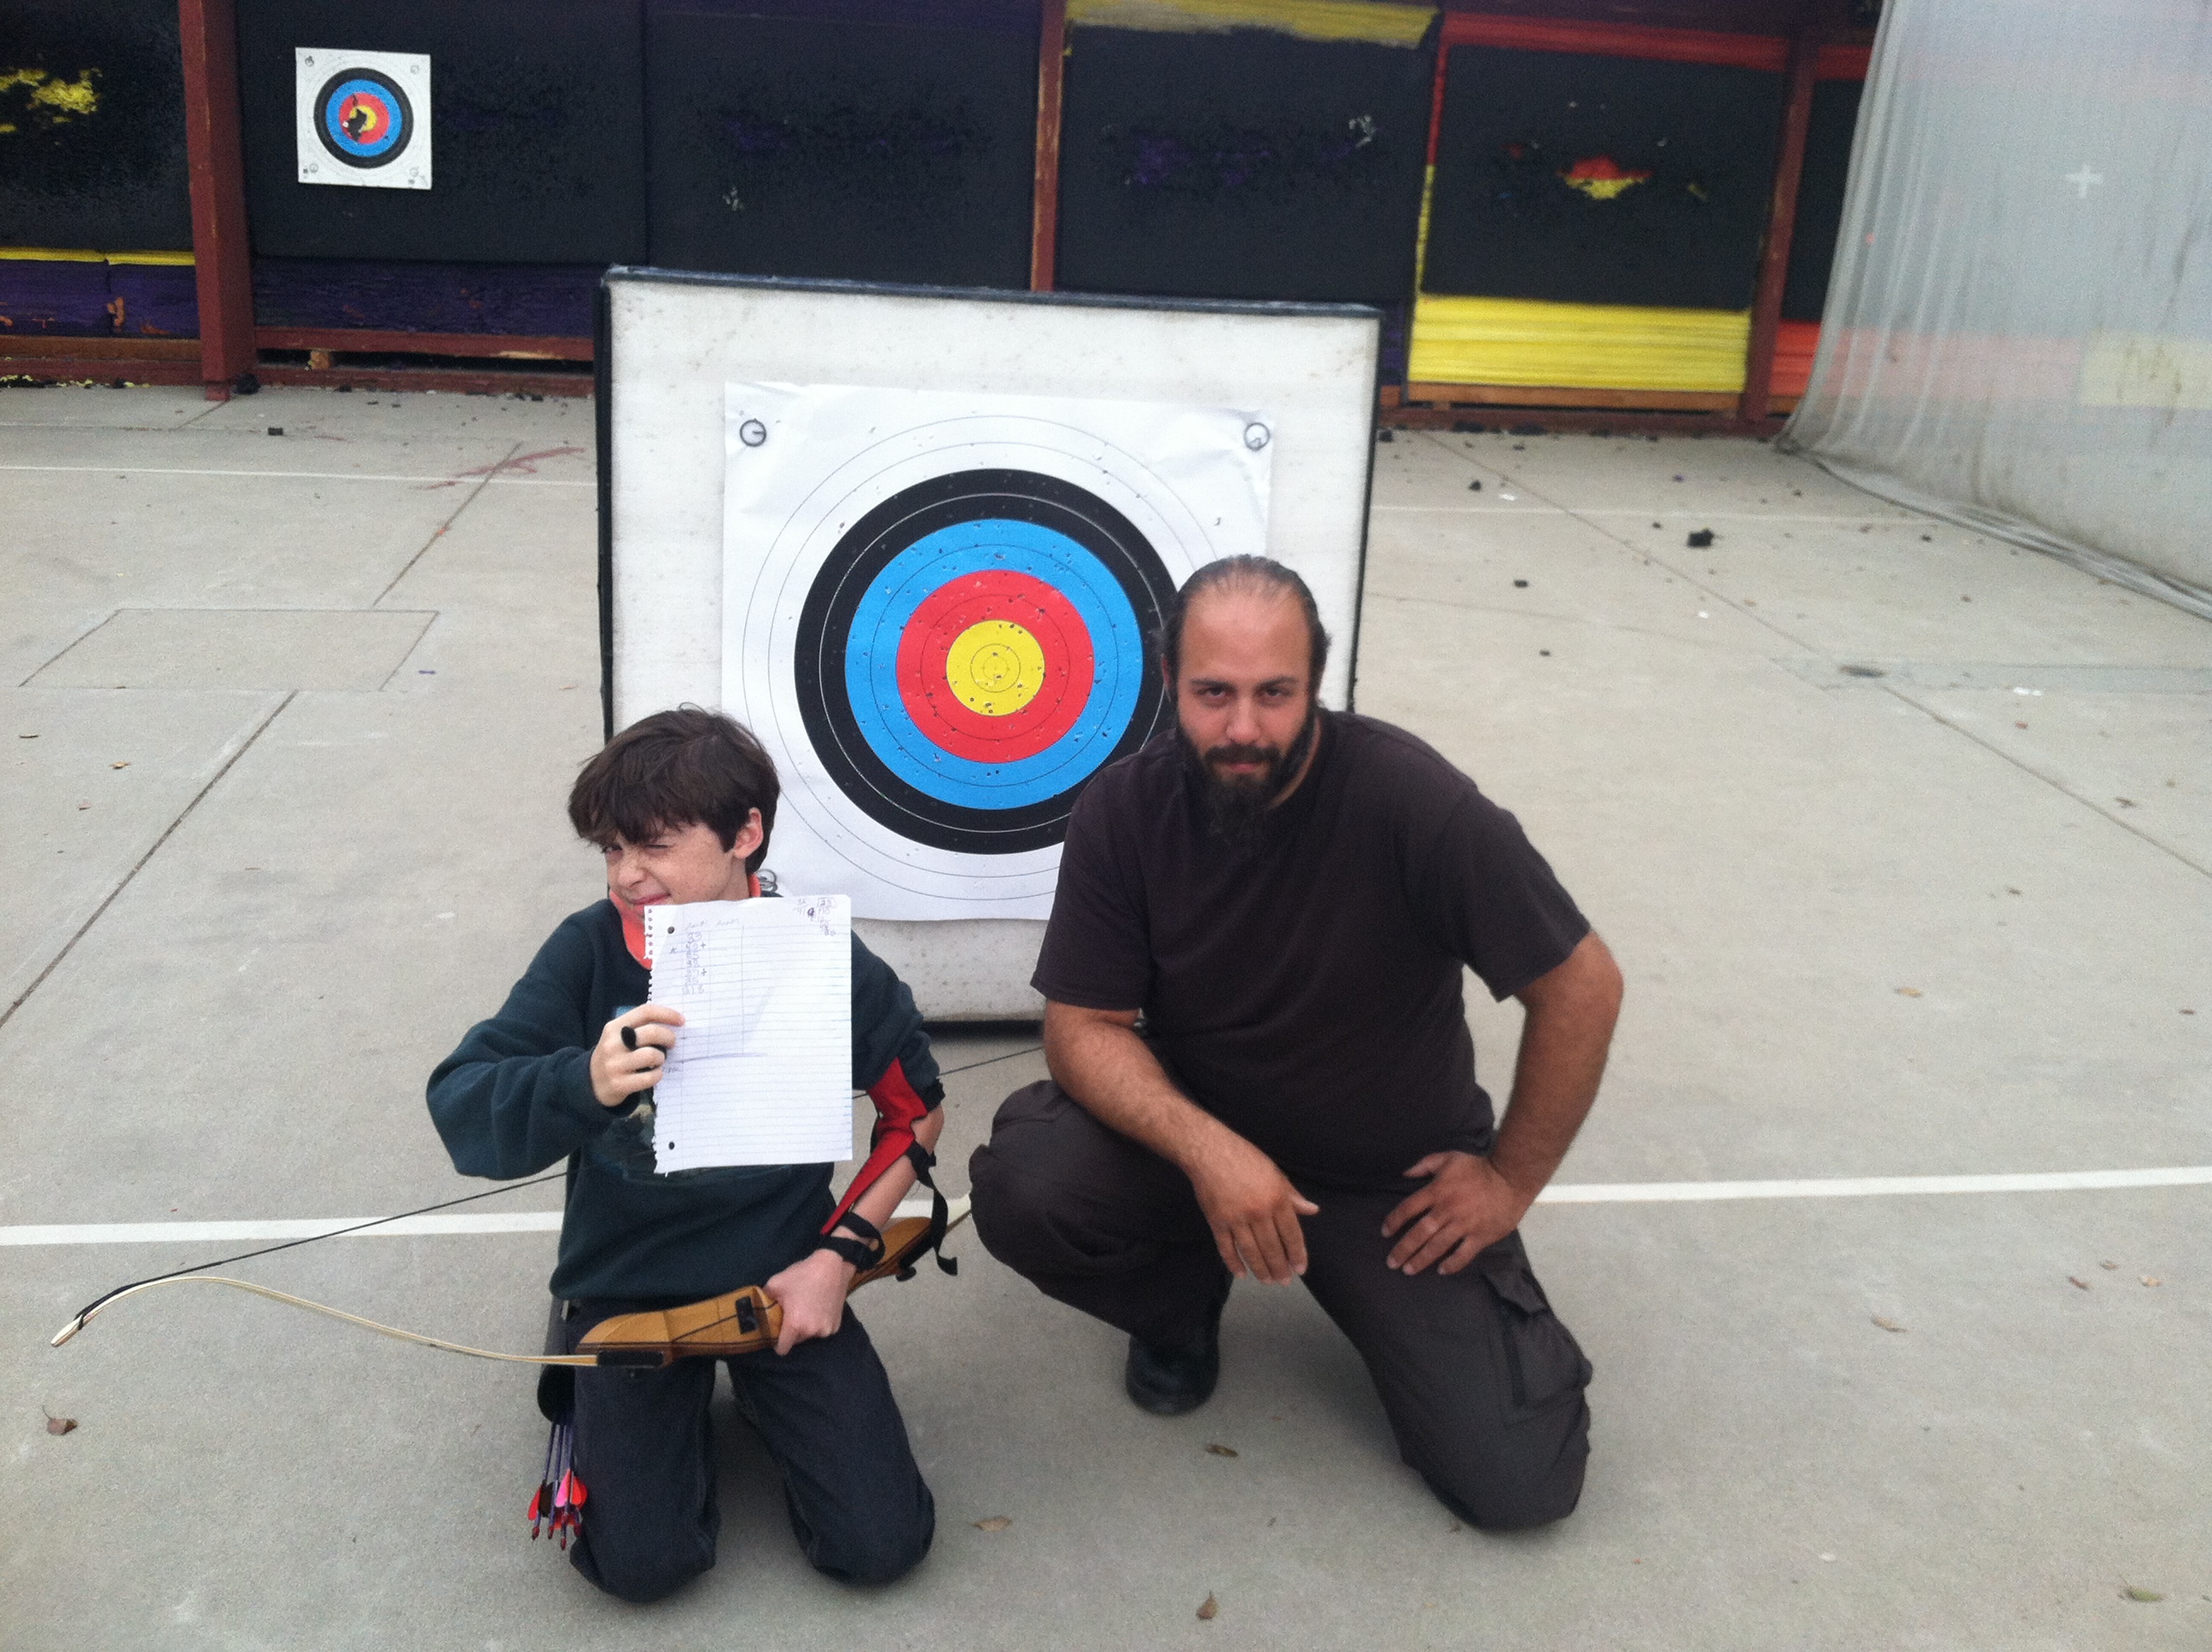 Archery certification completed!